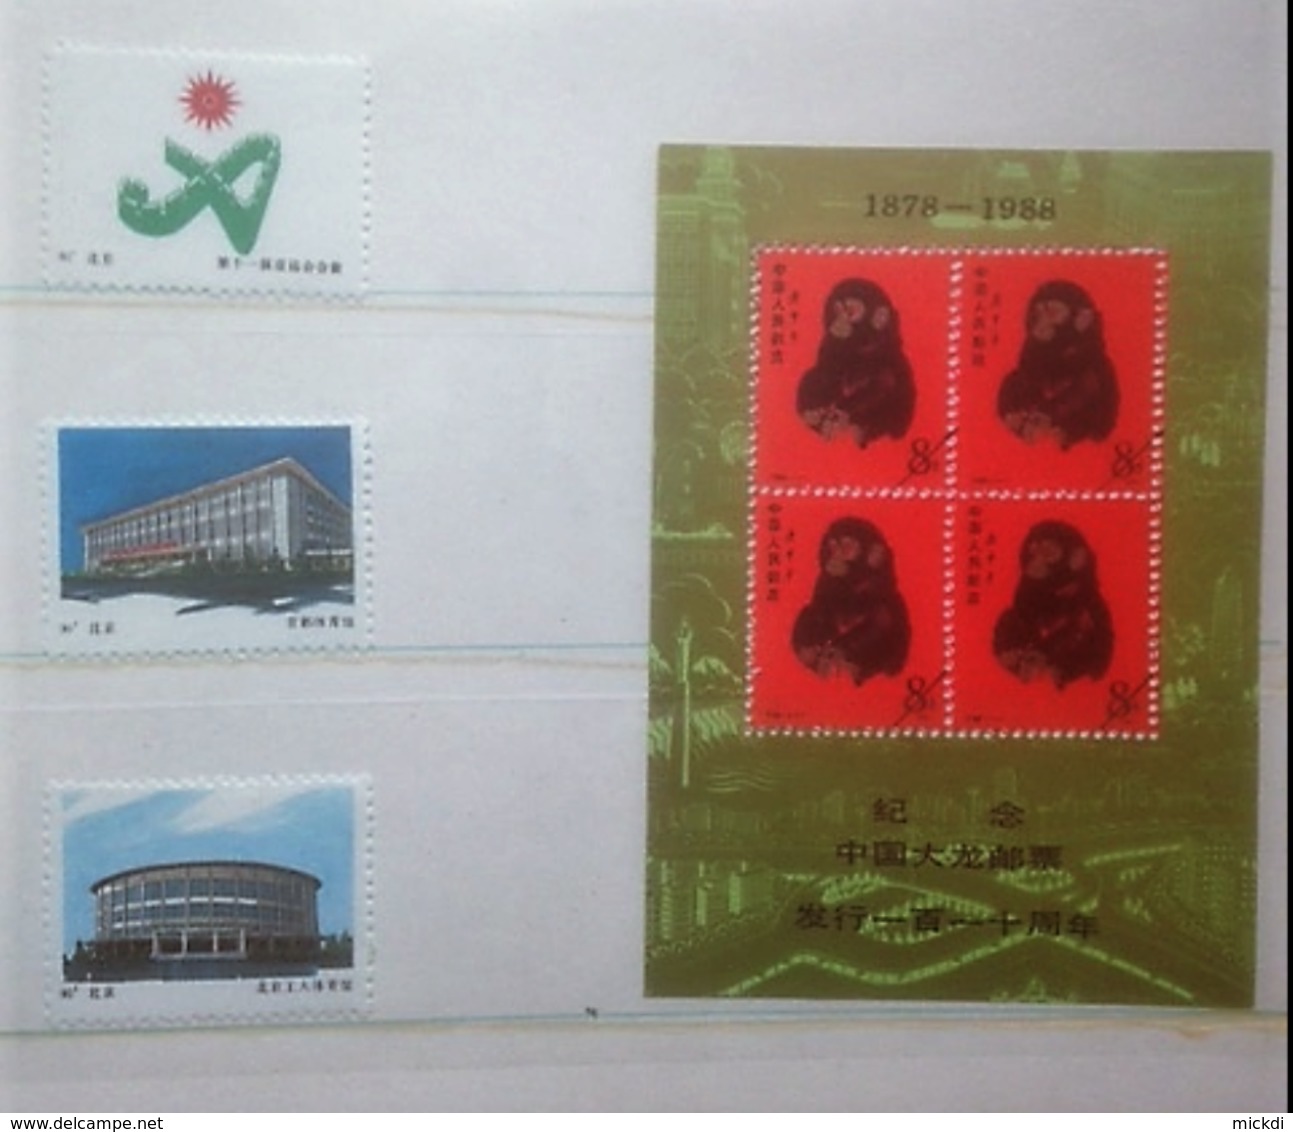 CHINE 47 TIMBRES NEUFS - POSTAGE STAMPS OF THE PEOPLE'S REPUBLIC OF CHINA - 7 SCANS